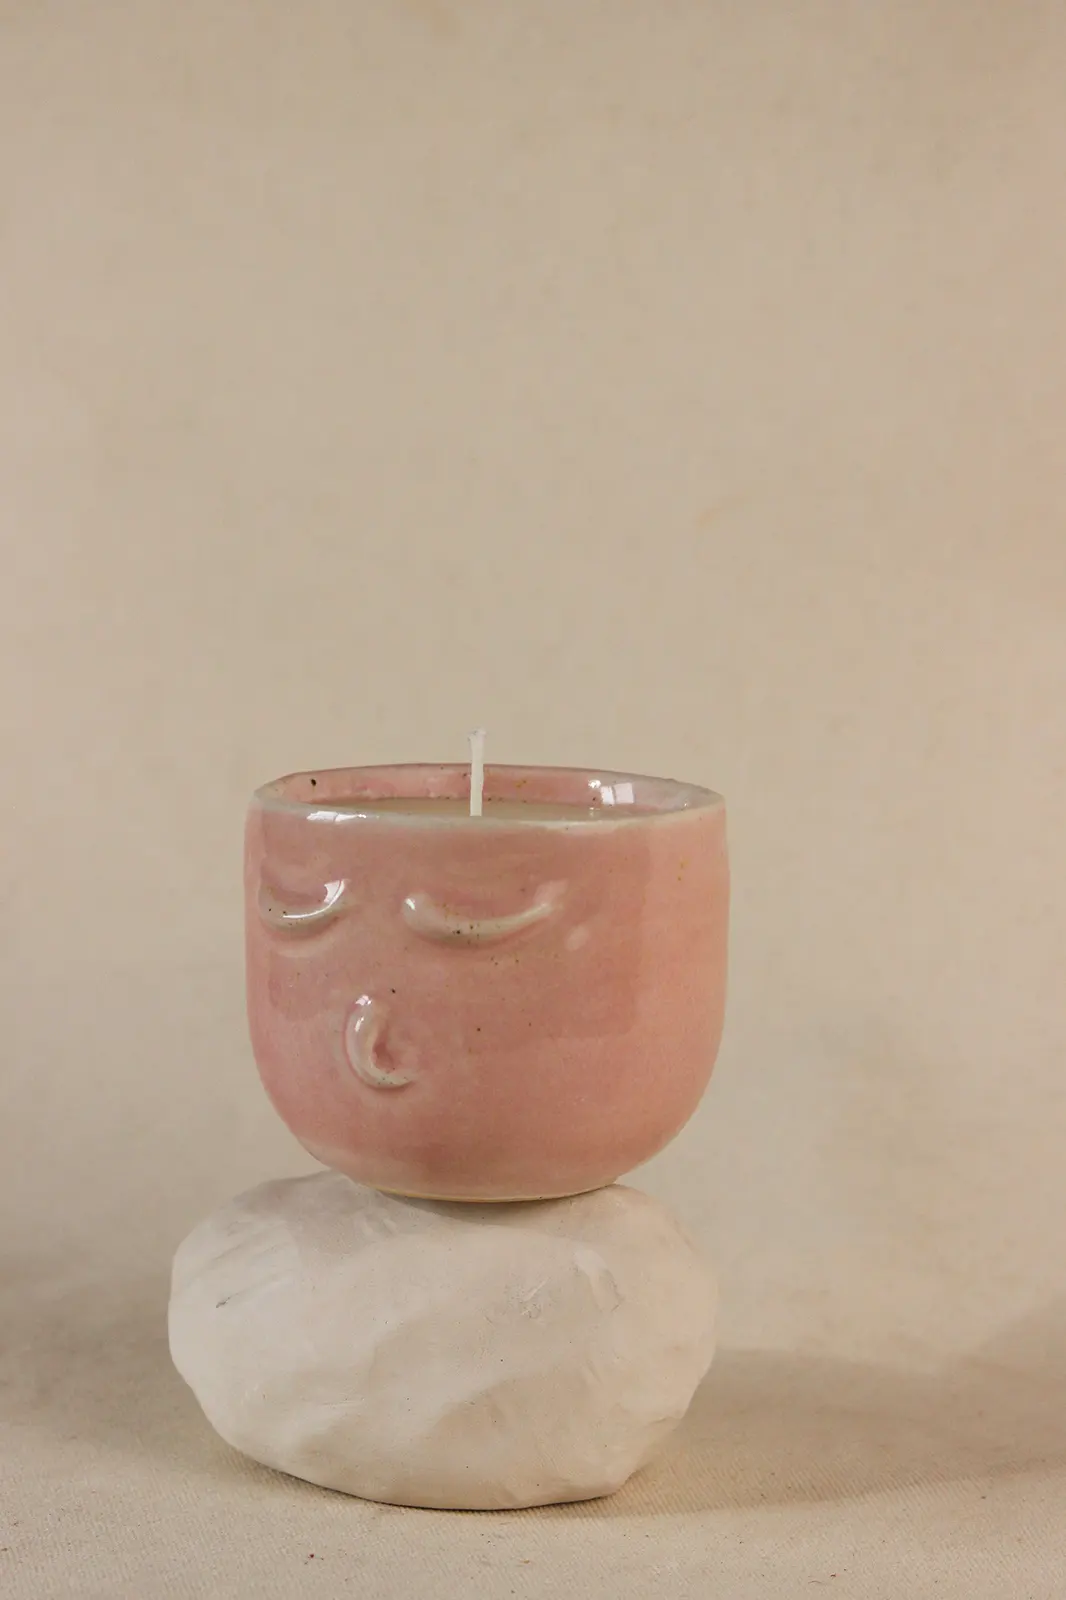 The priest ceramic face jar candle oishi new addition, soy wax candles, scent candle, wax candles, aromatic candles, jar candles, ceramic jar candle, candles, candle in a jar, scented candles near me, Toh, Sepia stories, online scented candles, best scented candles